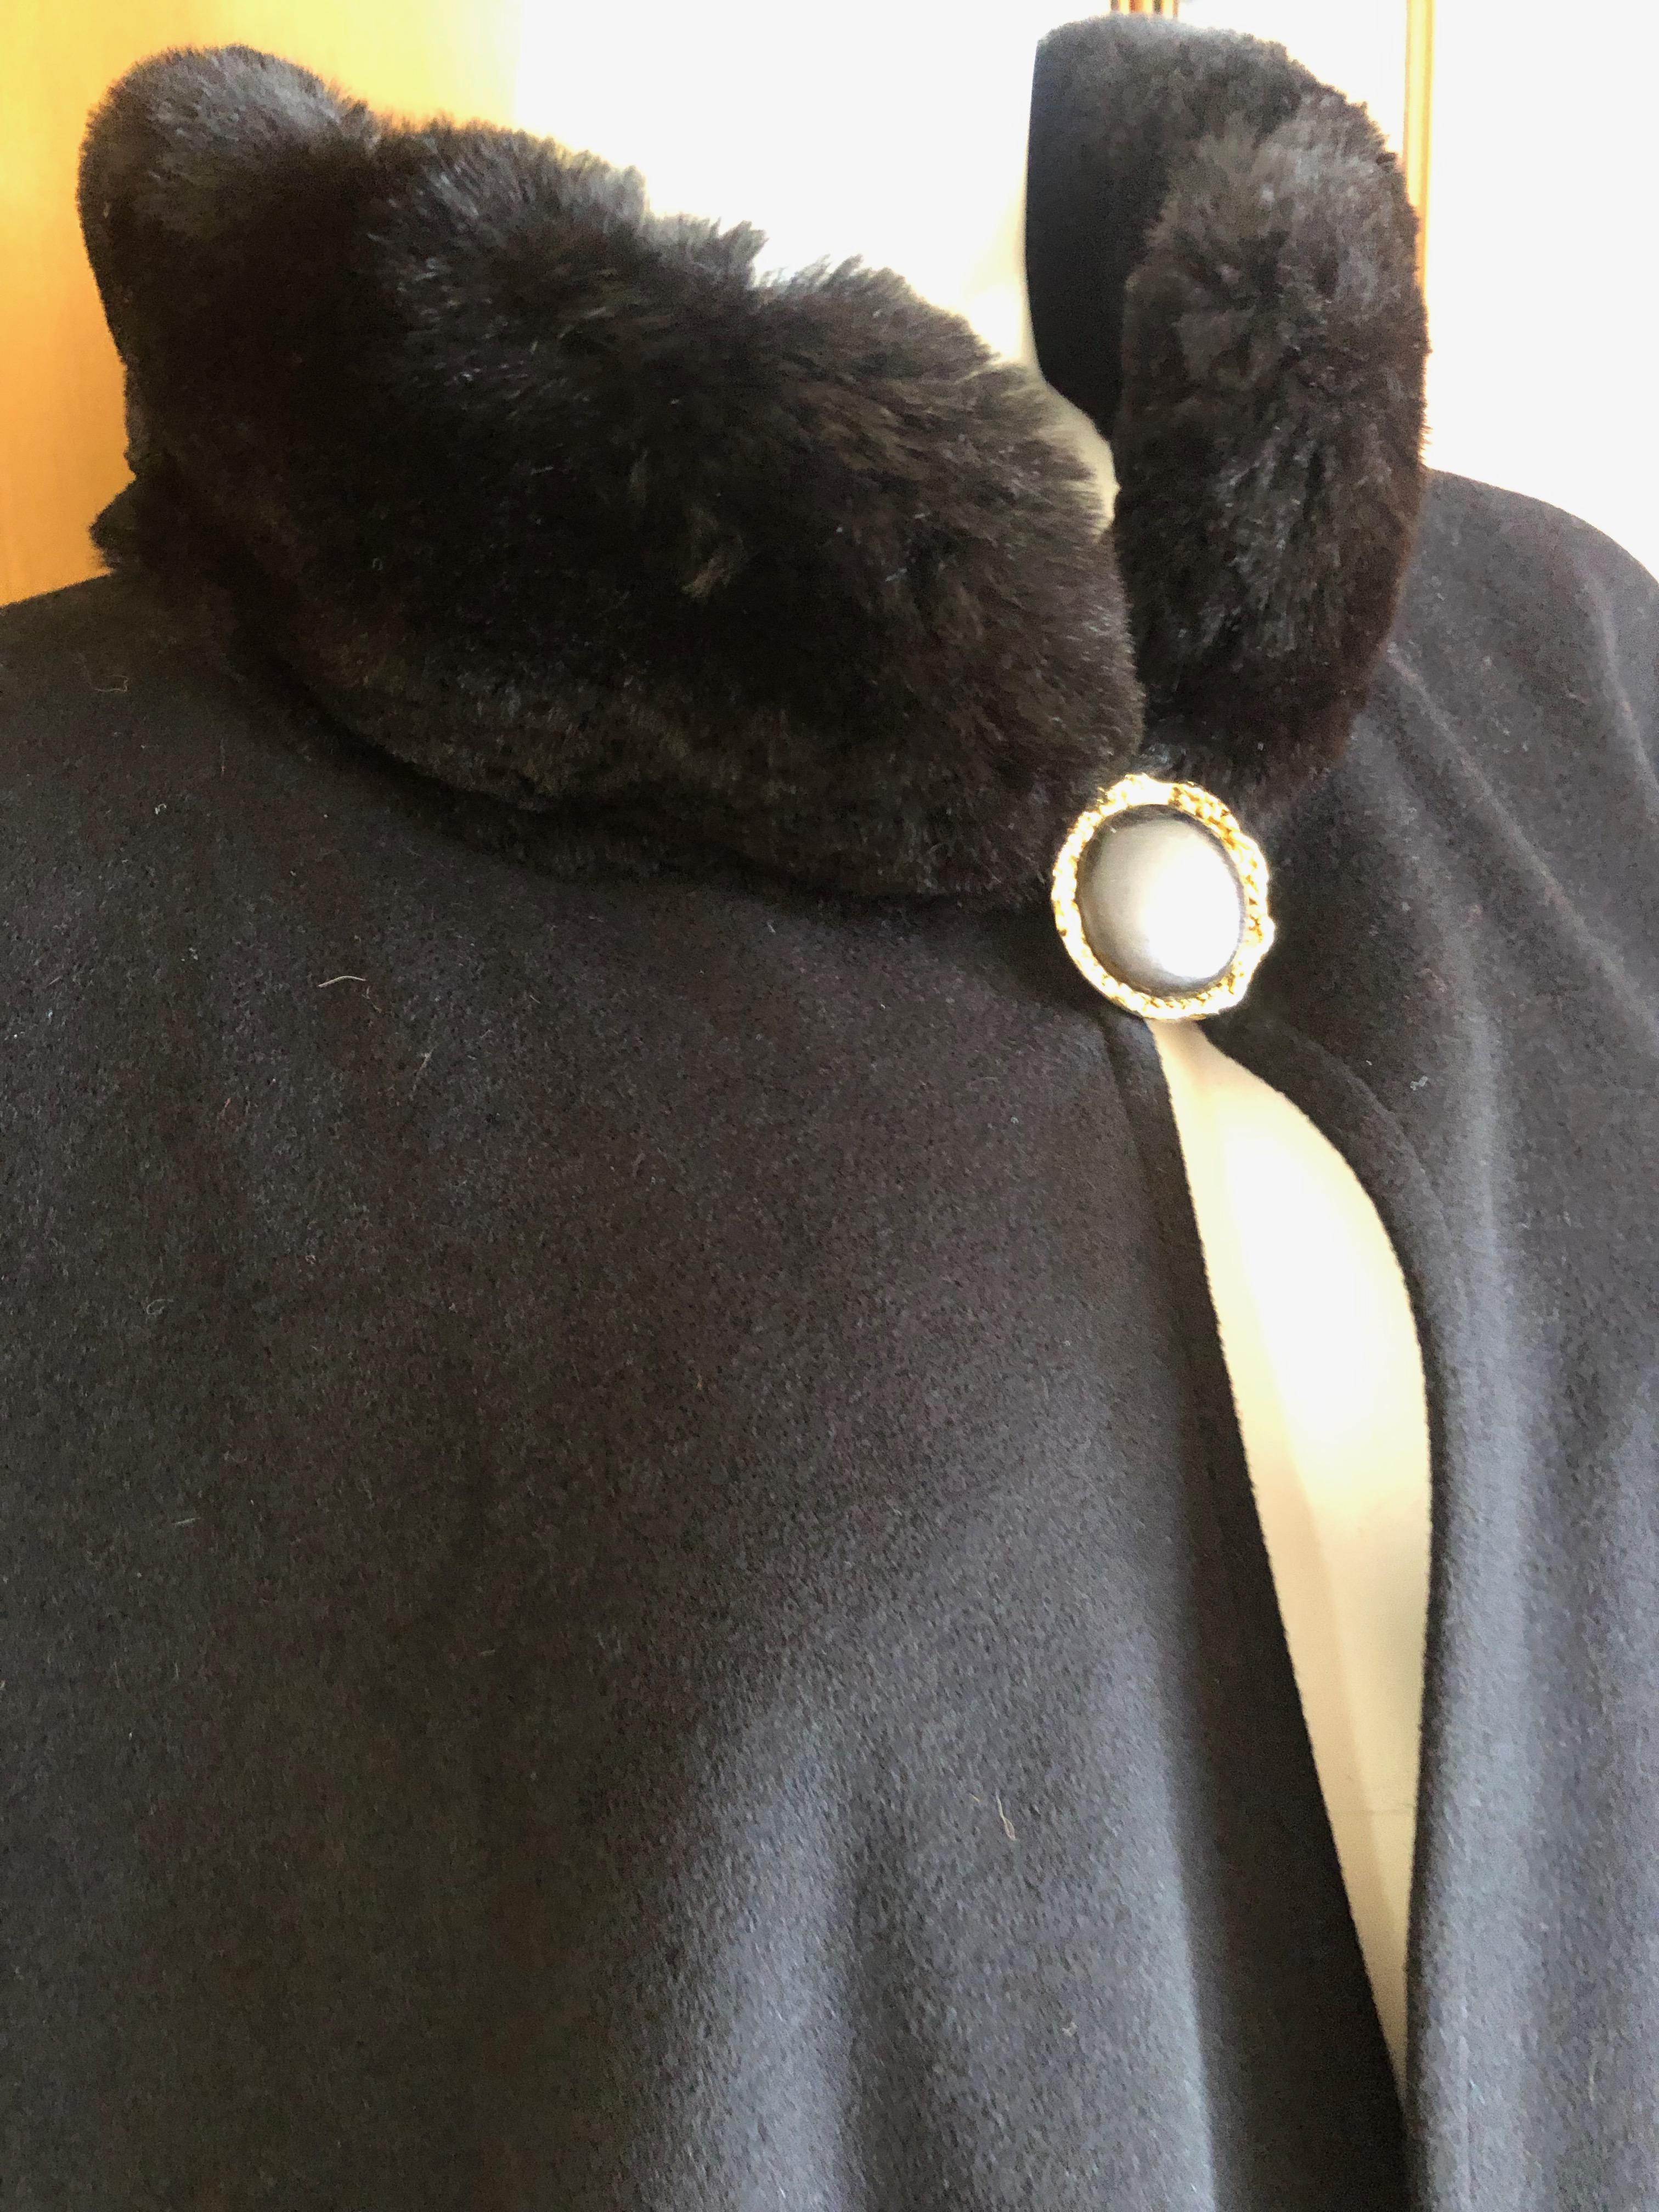 Yves Saint Laurent Fourrures Vintage Black Cashmere Cape w Fur Collars and Cuffs In Excellent Condition For Sale In Cloverdale, CA